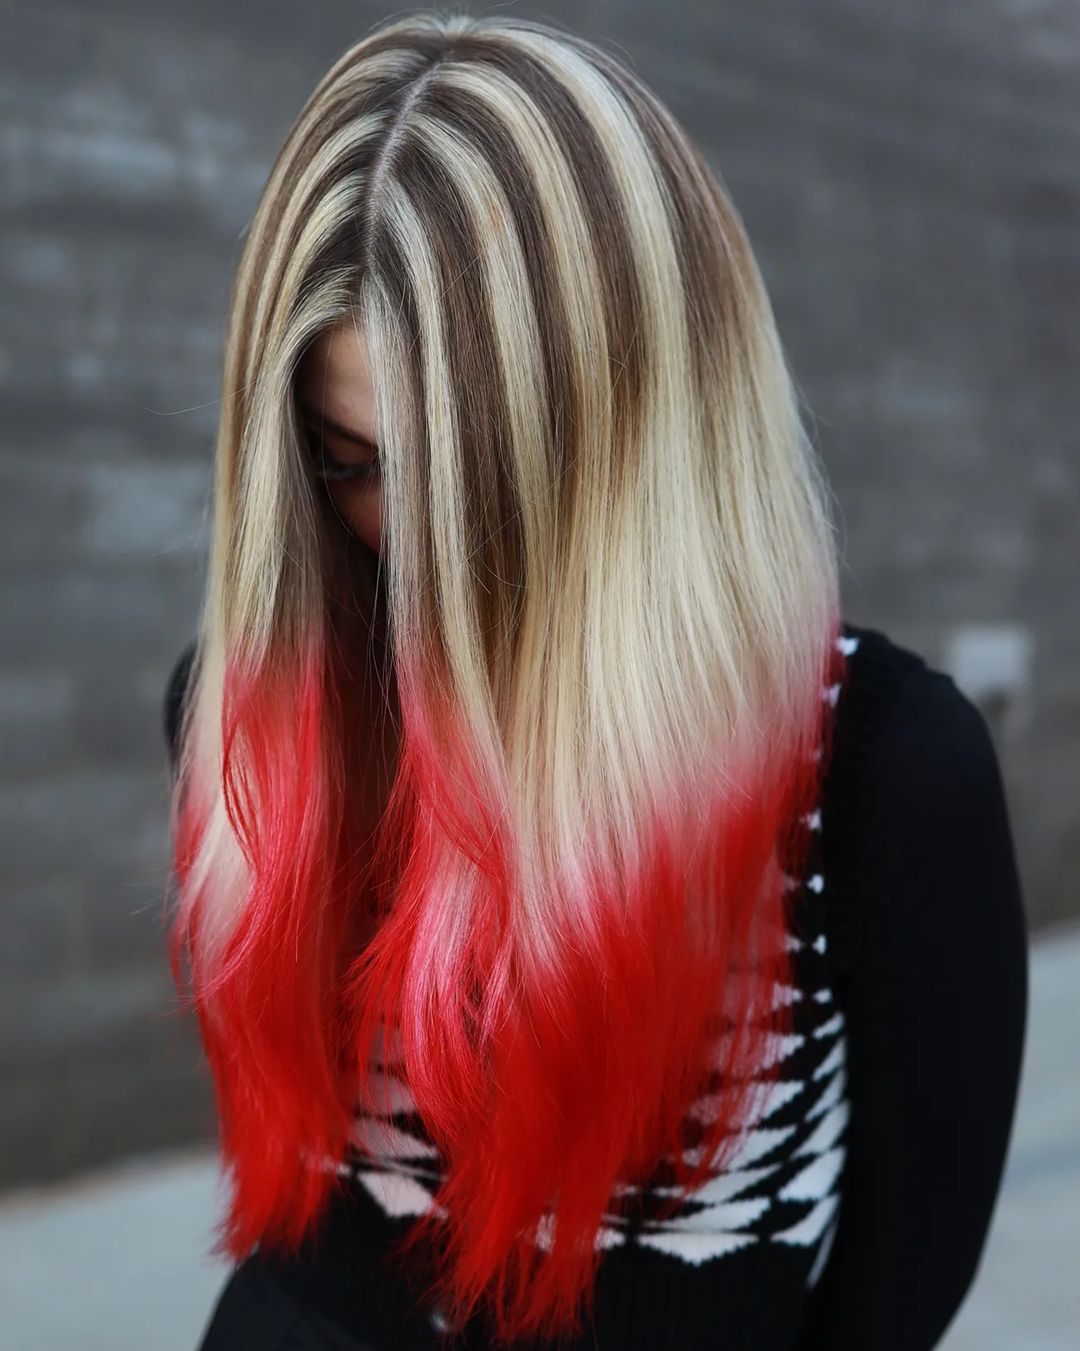 Long Straight Blonde Hair with Red Ends